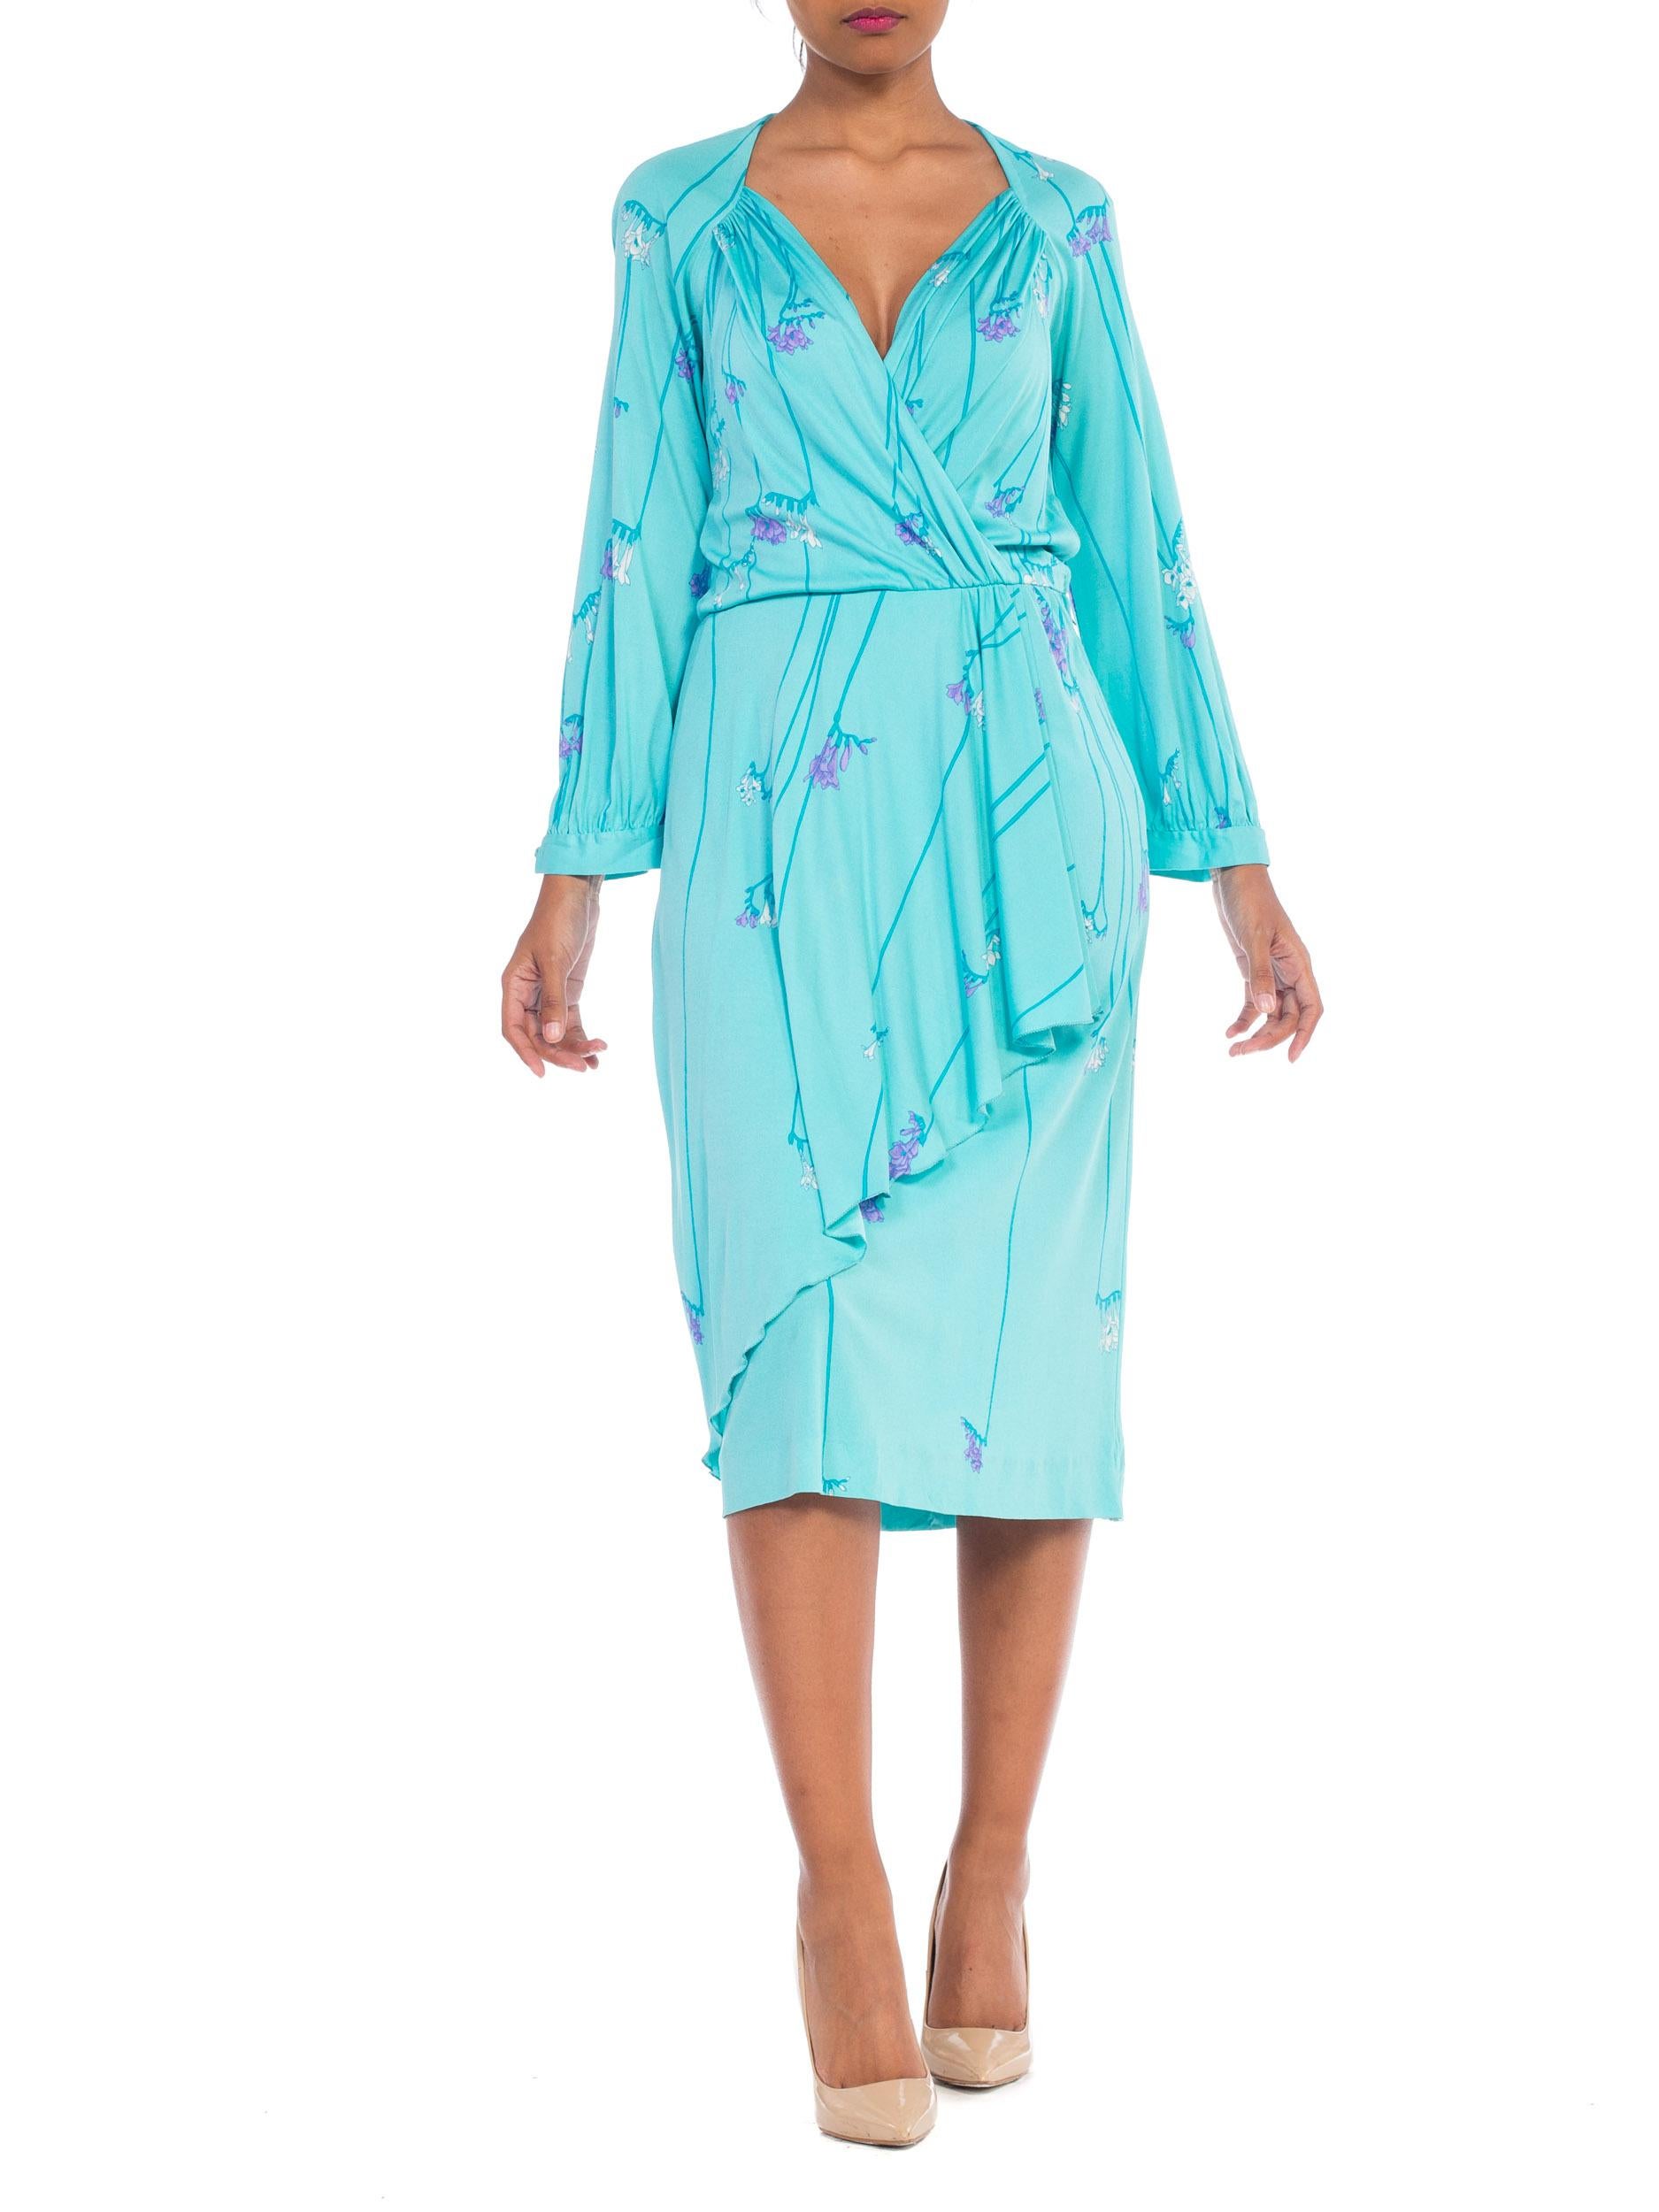 1970S DE PARISINI Aqua  Blue Silk Jersey Floral Dress Made In Italy In Excellent Condition For Sale In New York, NY